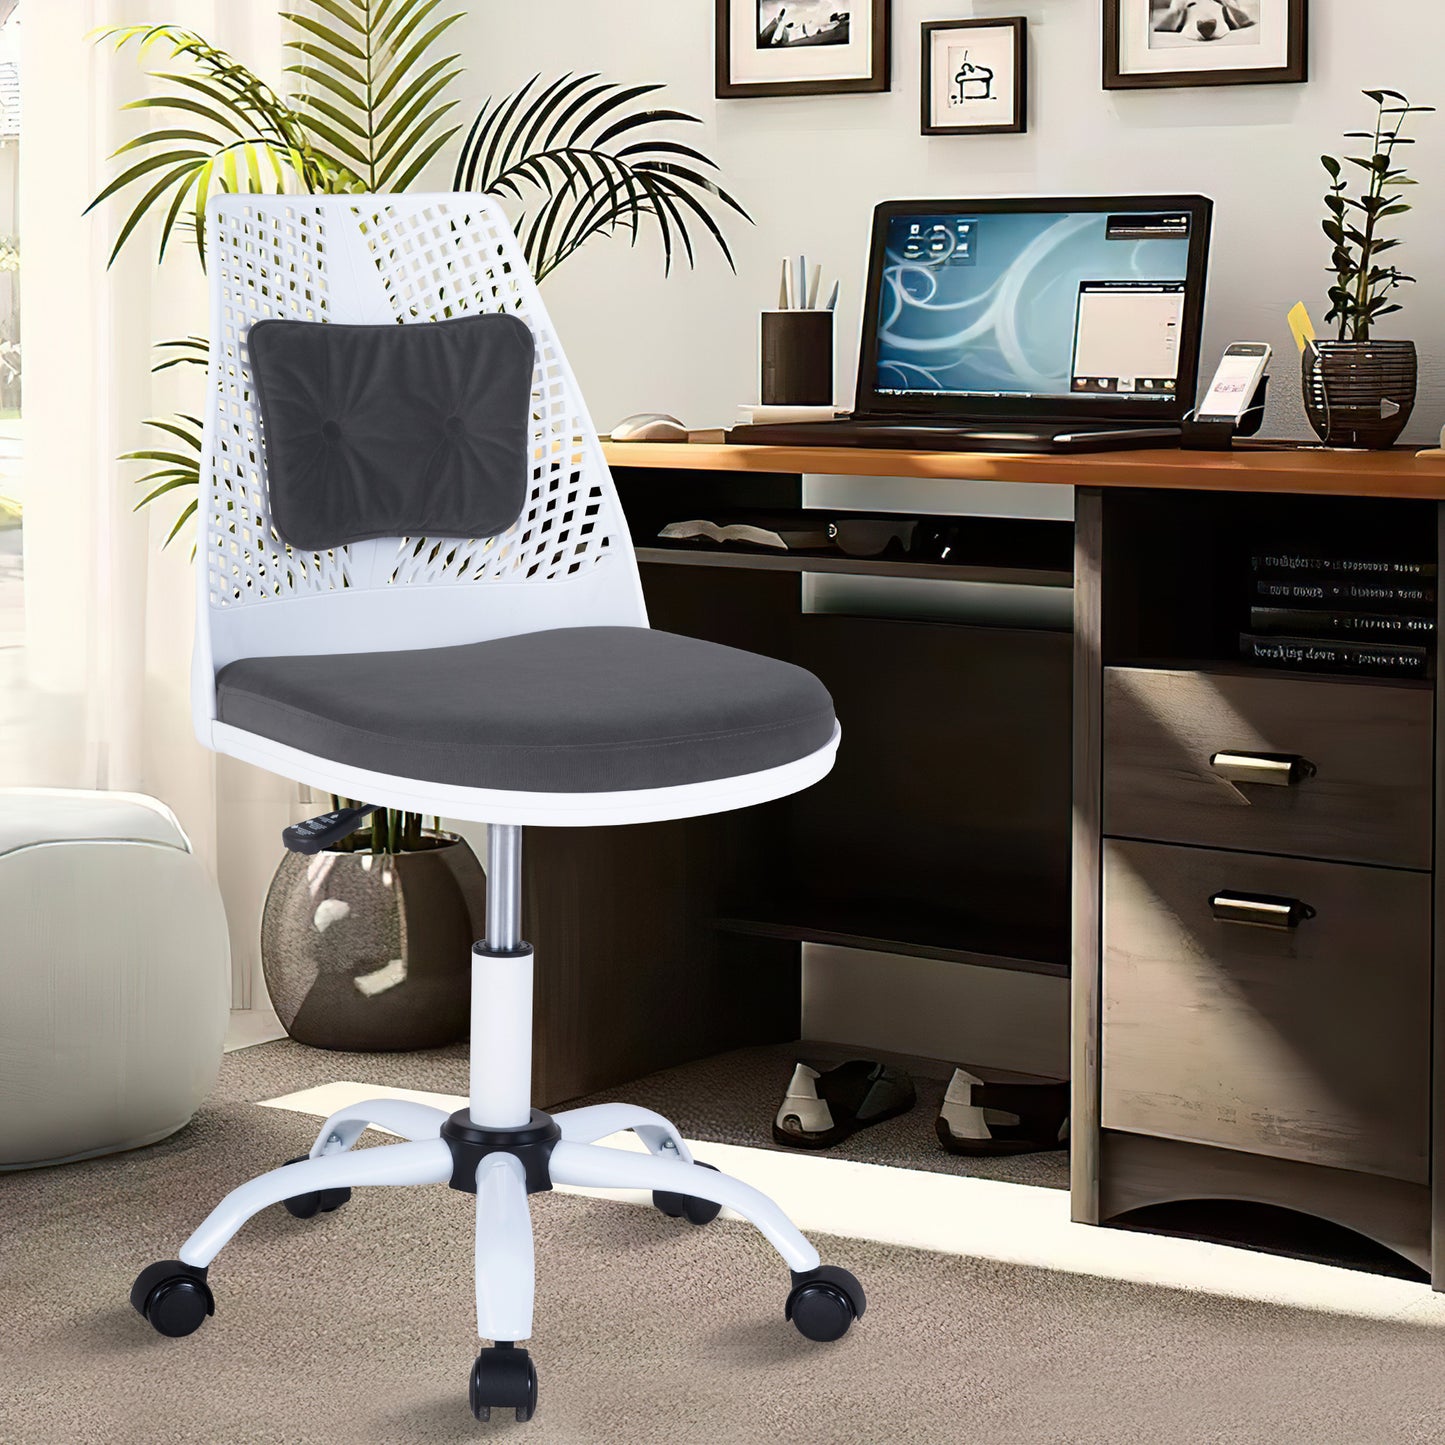 SYNGAR Office Desk Chair with Adjustable Height, Modern Arms Chair Office Chair Mid Back Soft Velvet Swivel Computer Home Task Chairs Ergonomic Executive Chair with Armrests, Gray